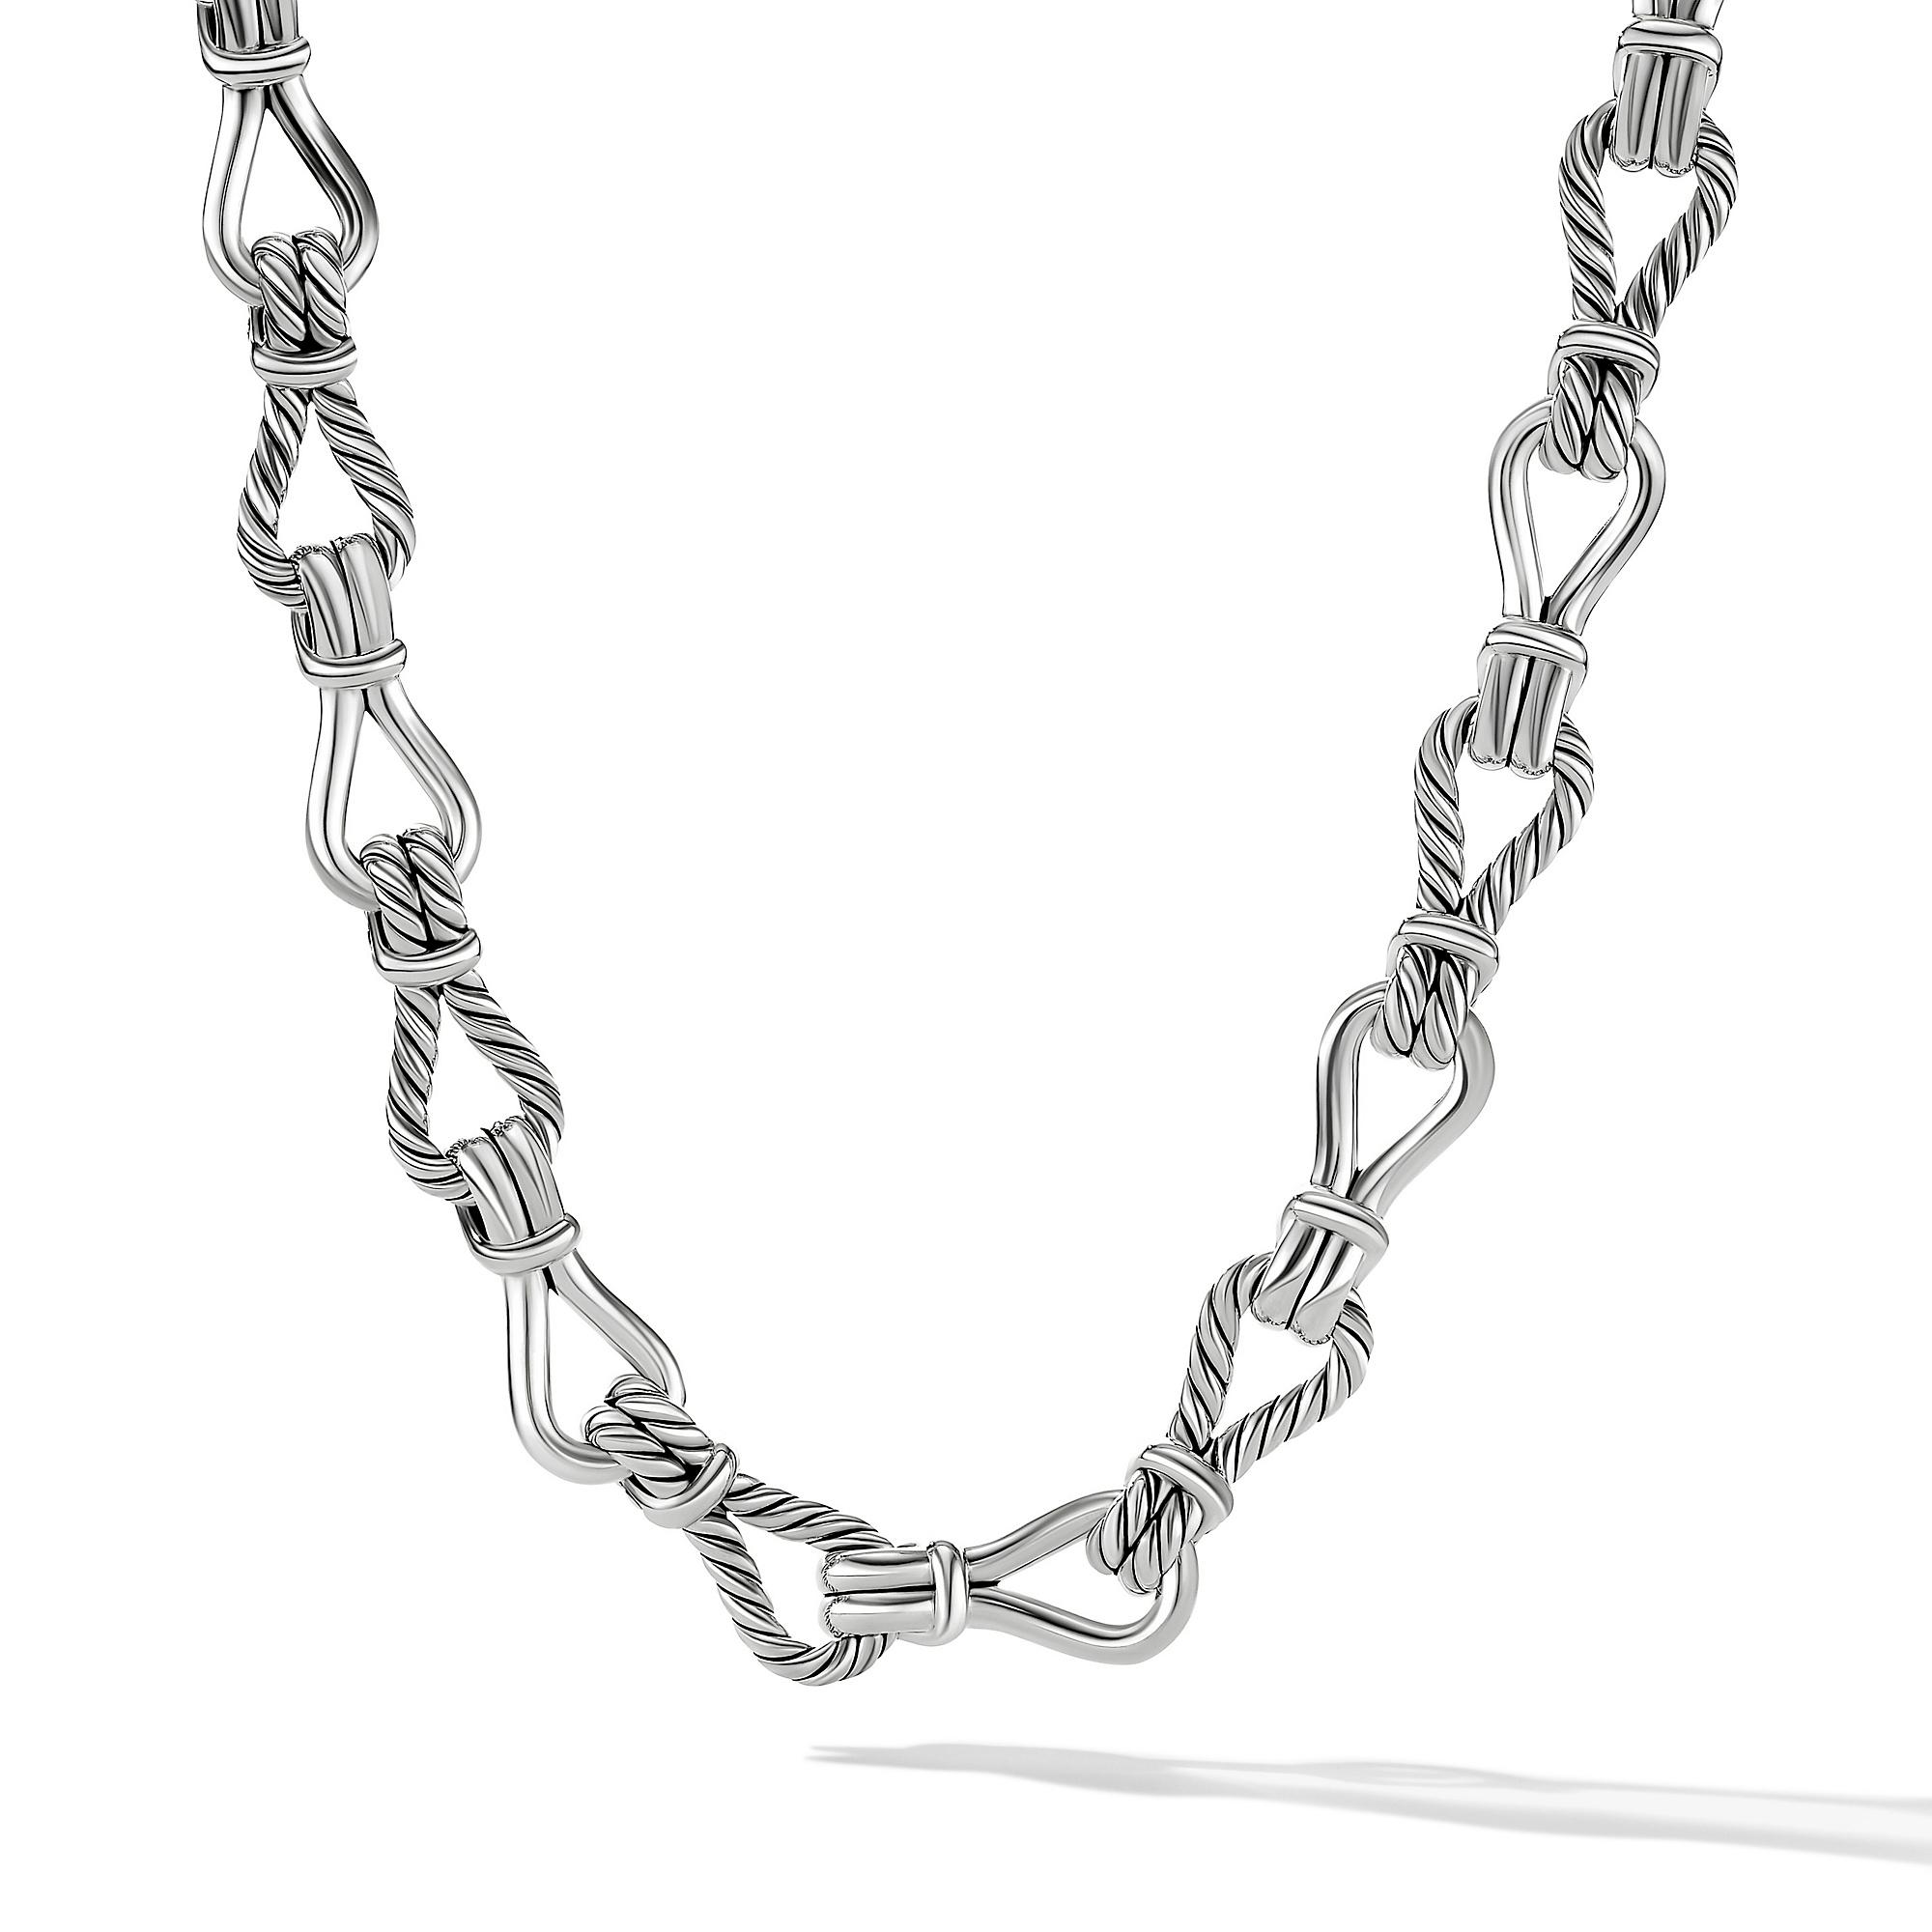 David Yurman Thoroughbred Loop Chain Link Necklace, 16 inches